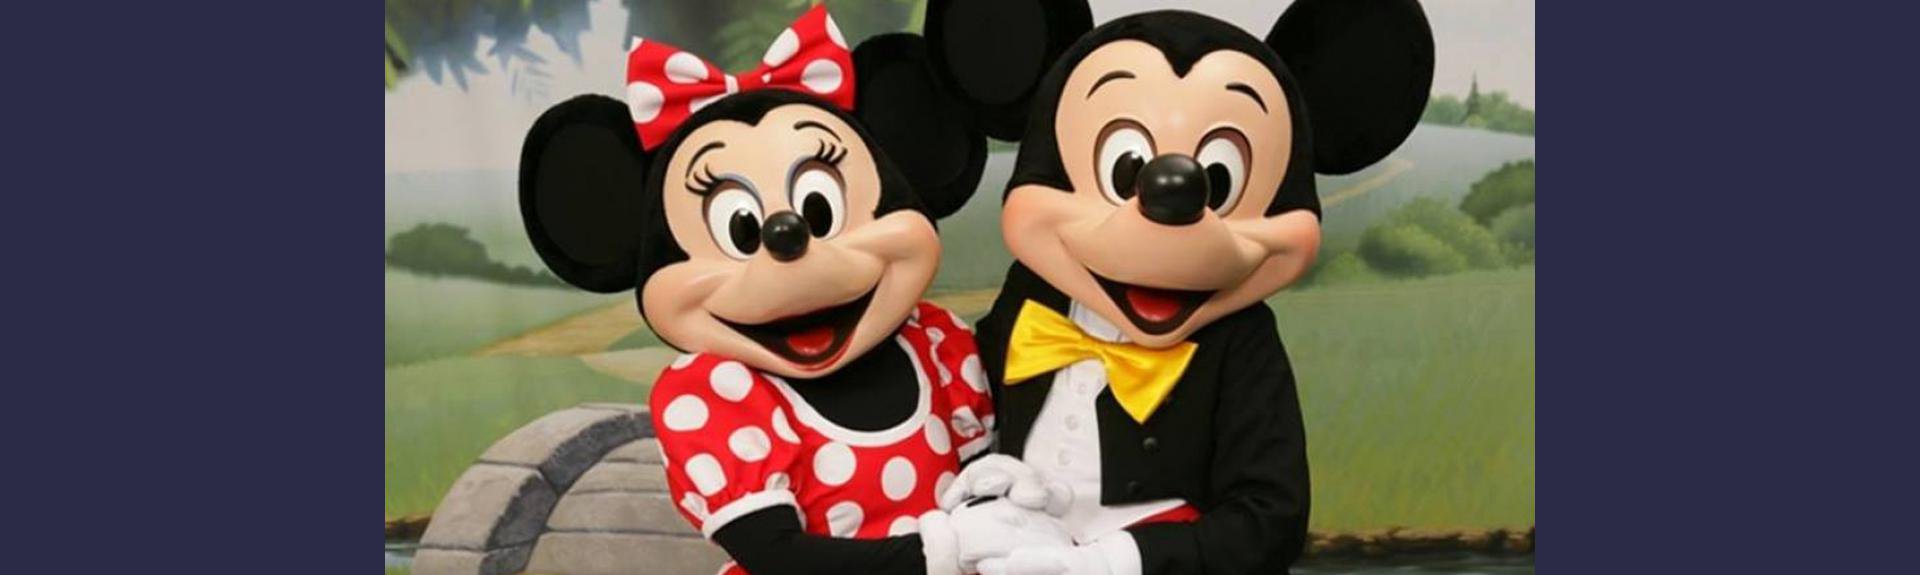 Meet Mickey and Minnie Mouse!